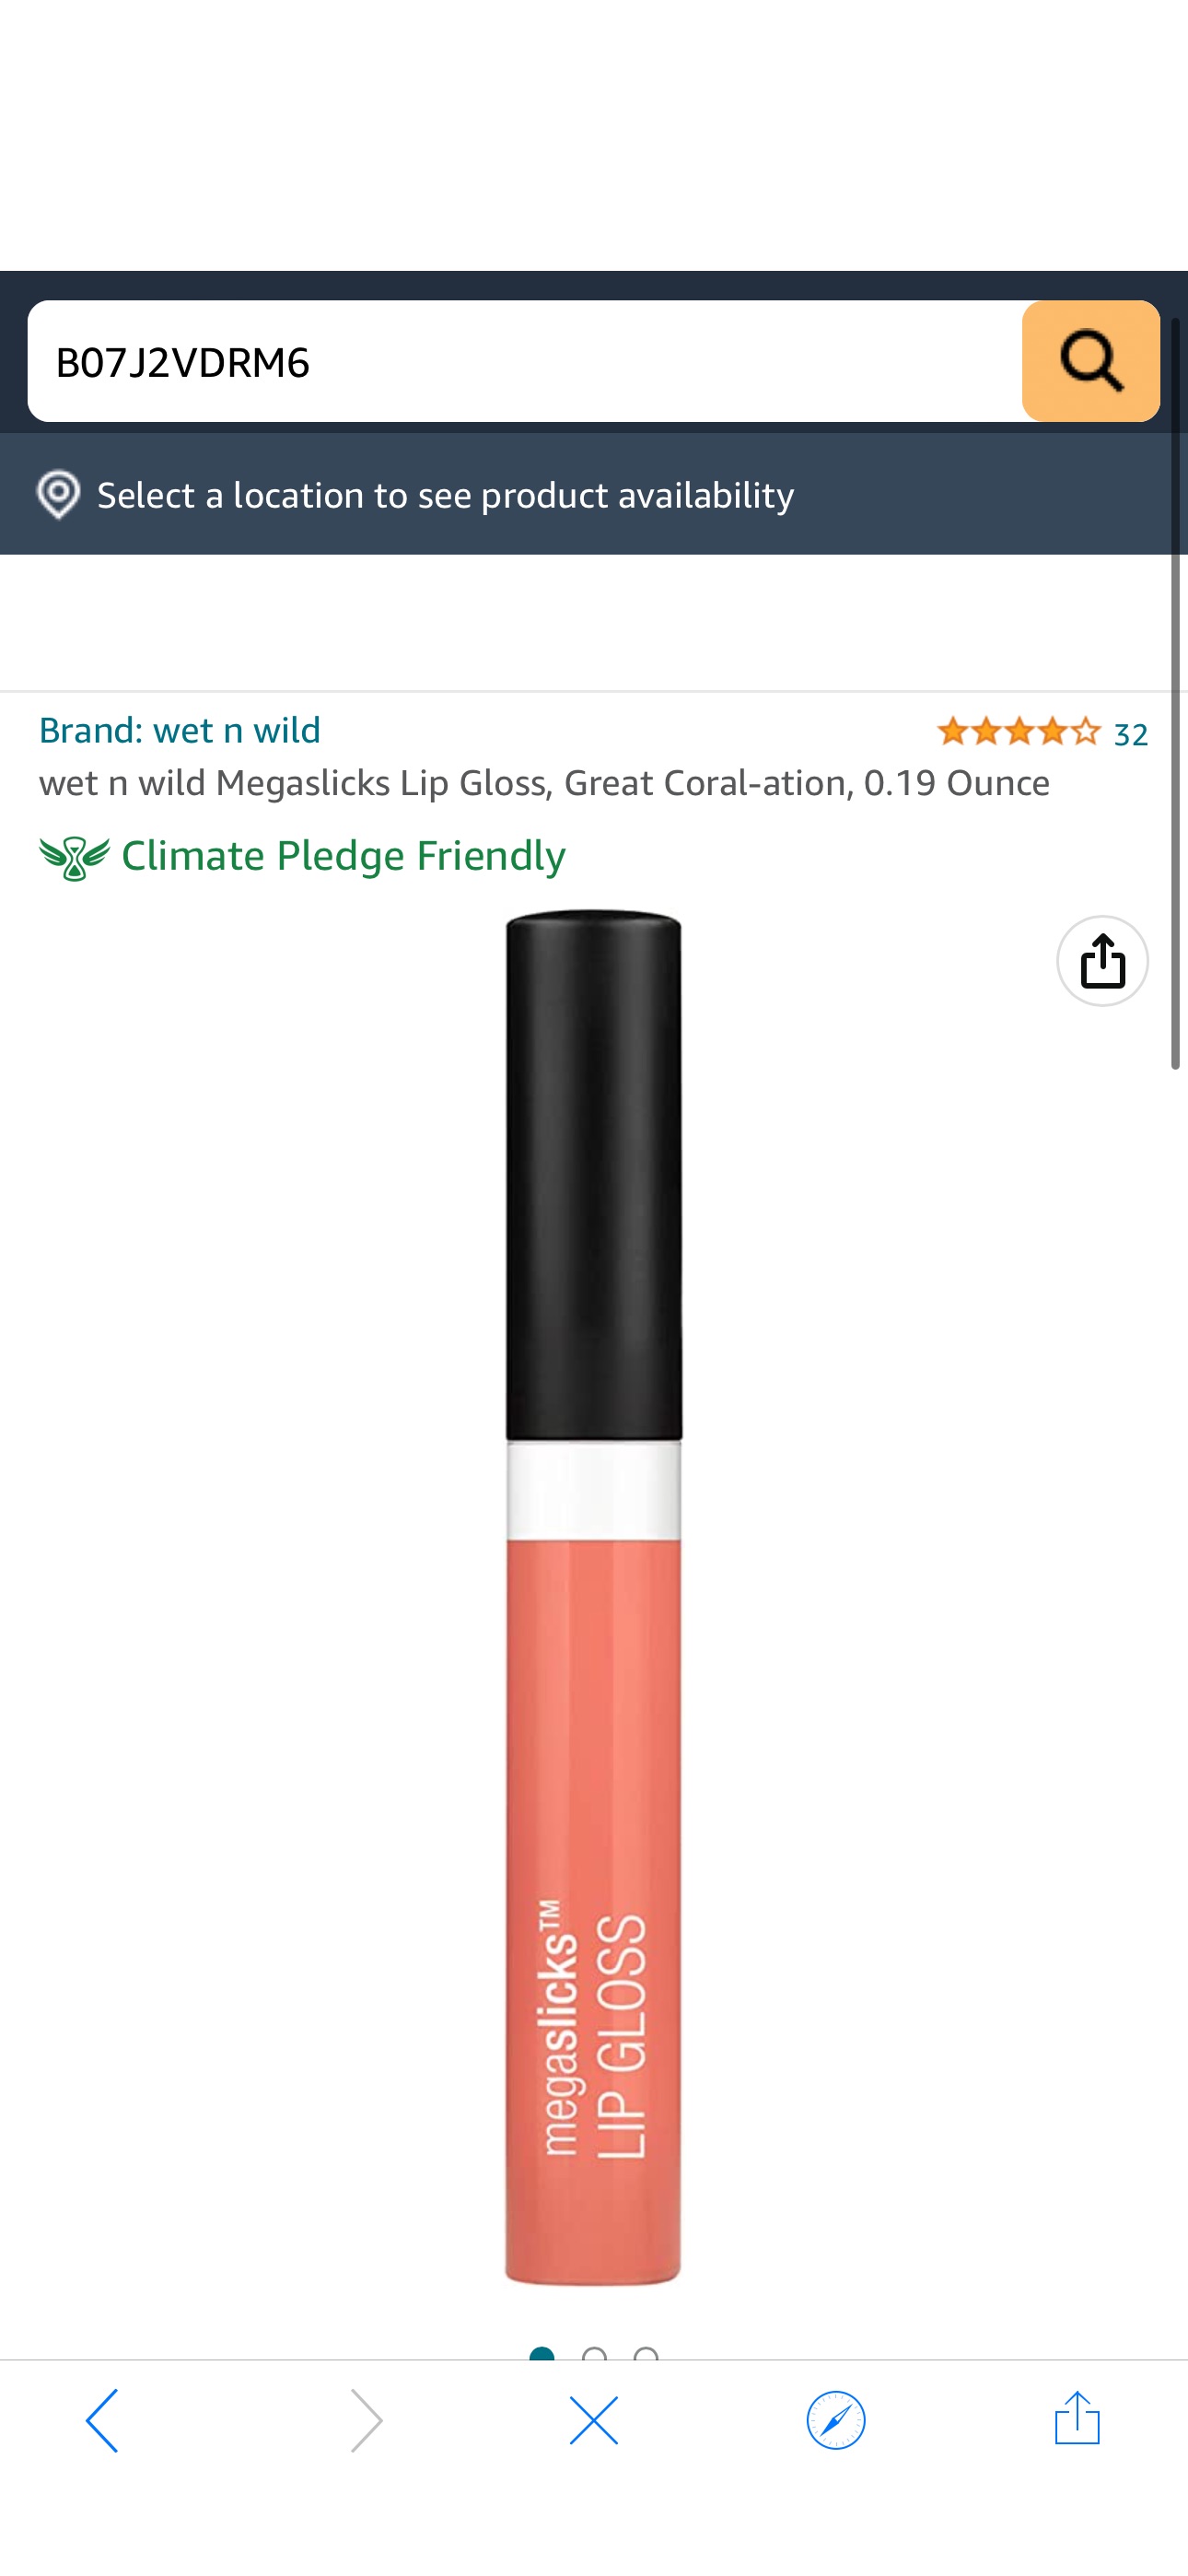 Amazon.com : wet n wild Megaslicks Lip Gloss, Great Coral-ation, 0.19 Ounce : Beauty & Personal Care